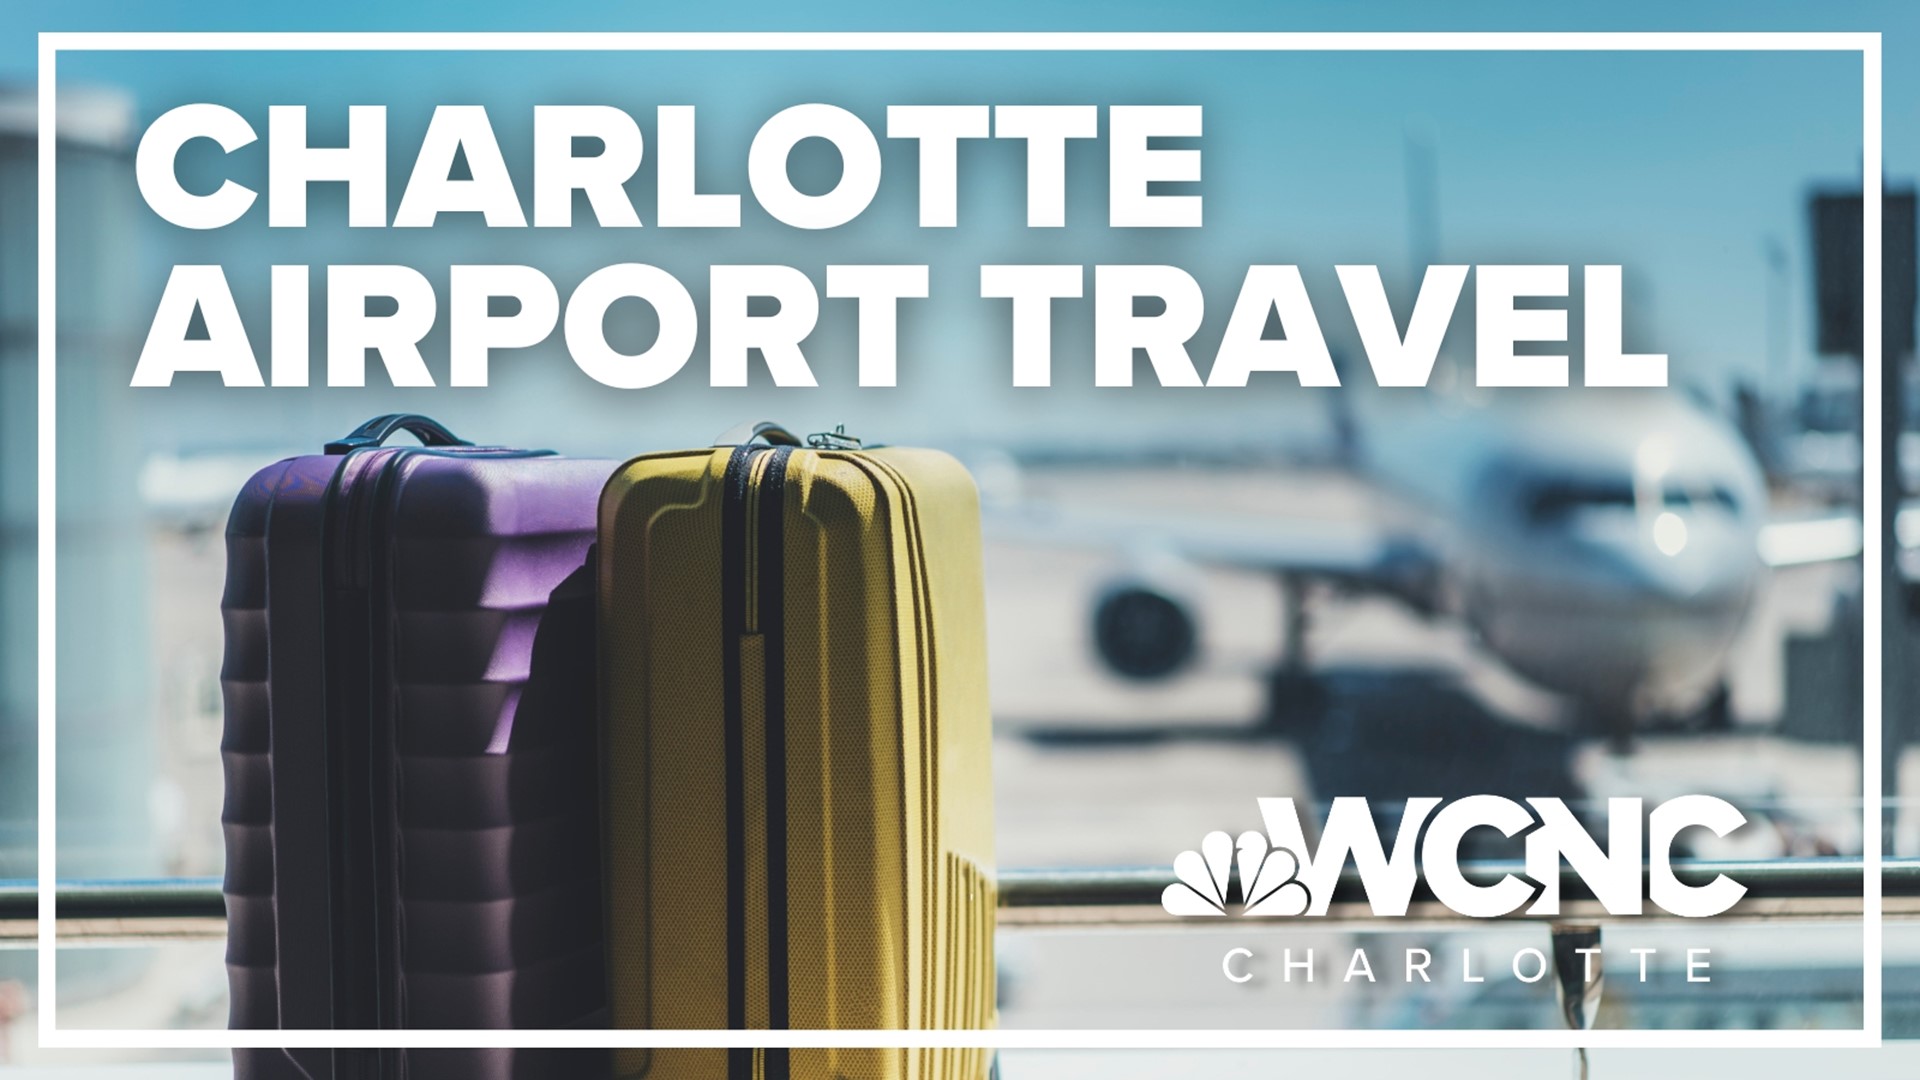 Charlotte Douglas International Airport saw even more passengers in 2022 than in 2021.